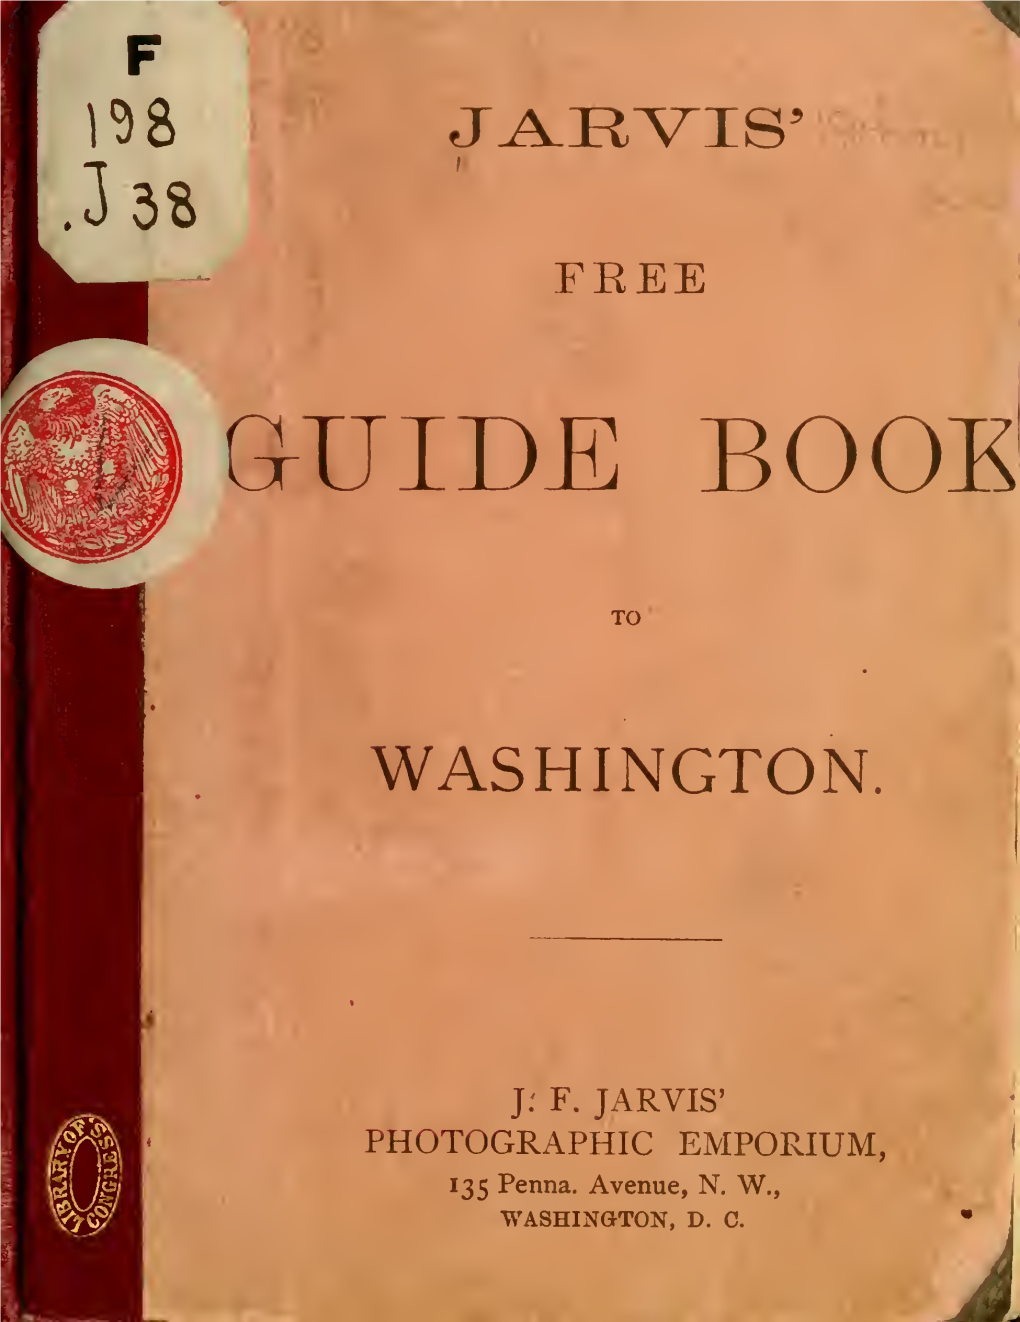 Jarvis' Free Guide Book to Washington